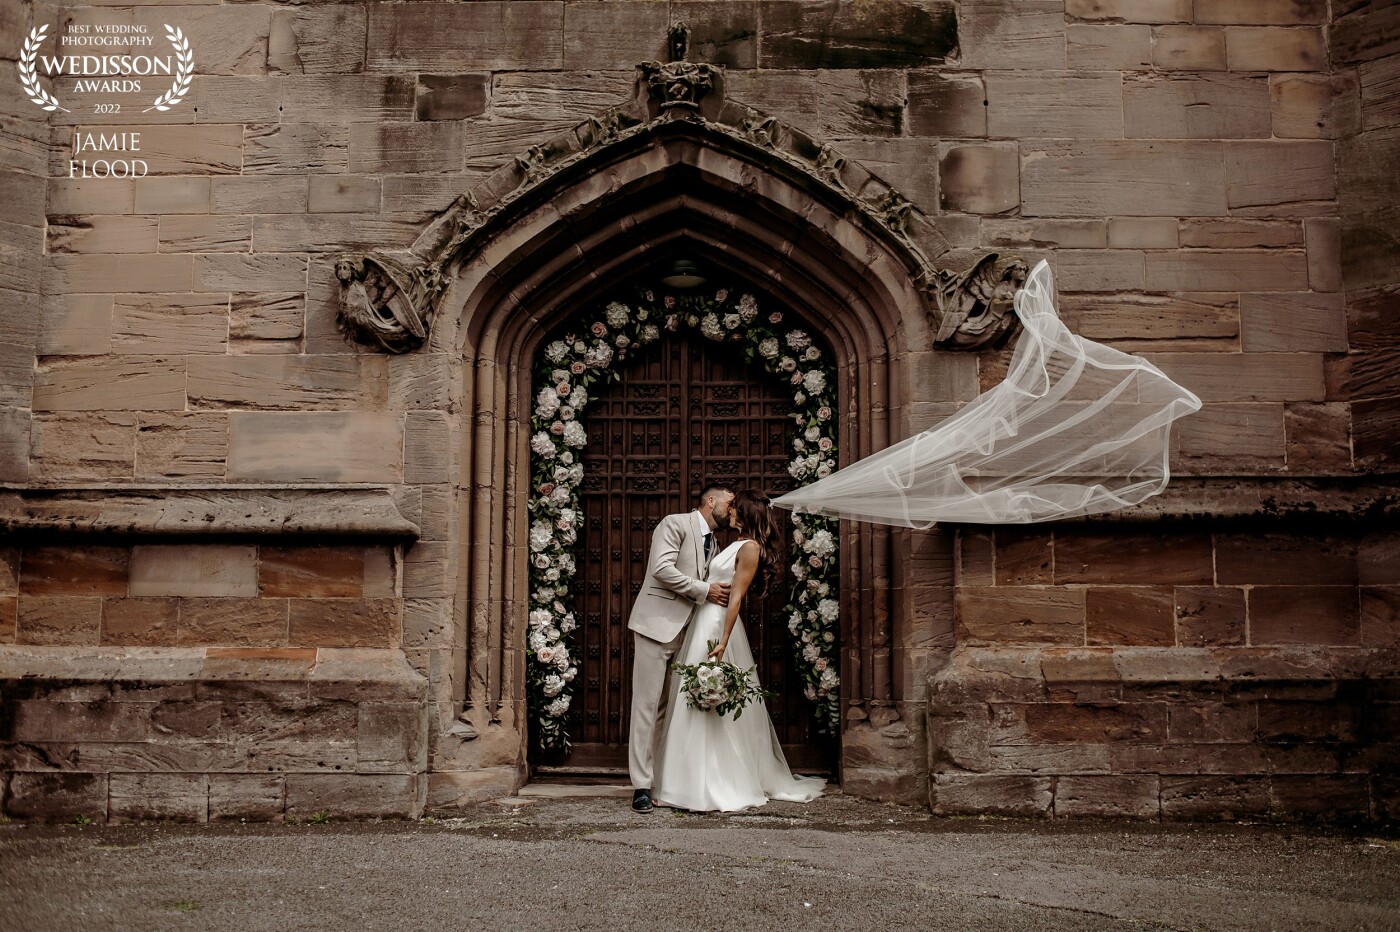 Being a photographer in the UK means that the weather changes from minute to minute ! This image was captured in a short period of the day when suddenly the wind was wild! I would often borrow someone to flick the veil to get a similar shot but it was nice to capture it naturally